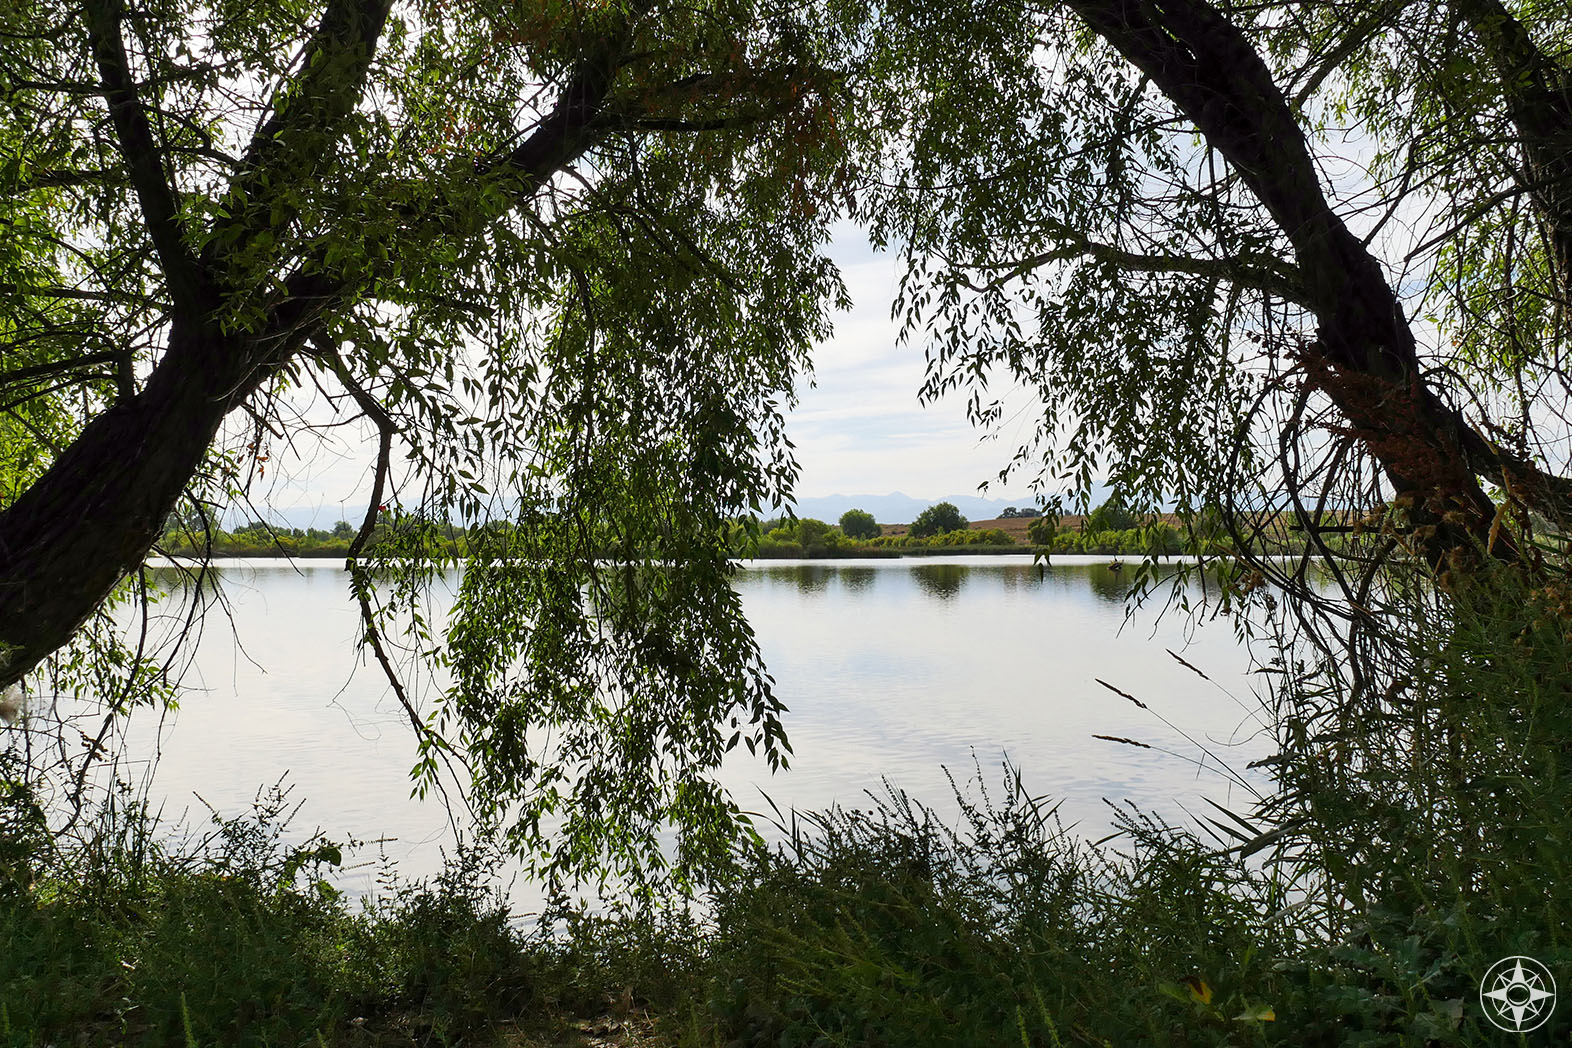 View through the trees of Pelican Pond in St Vrain State Park